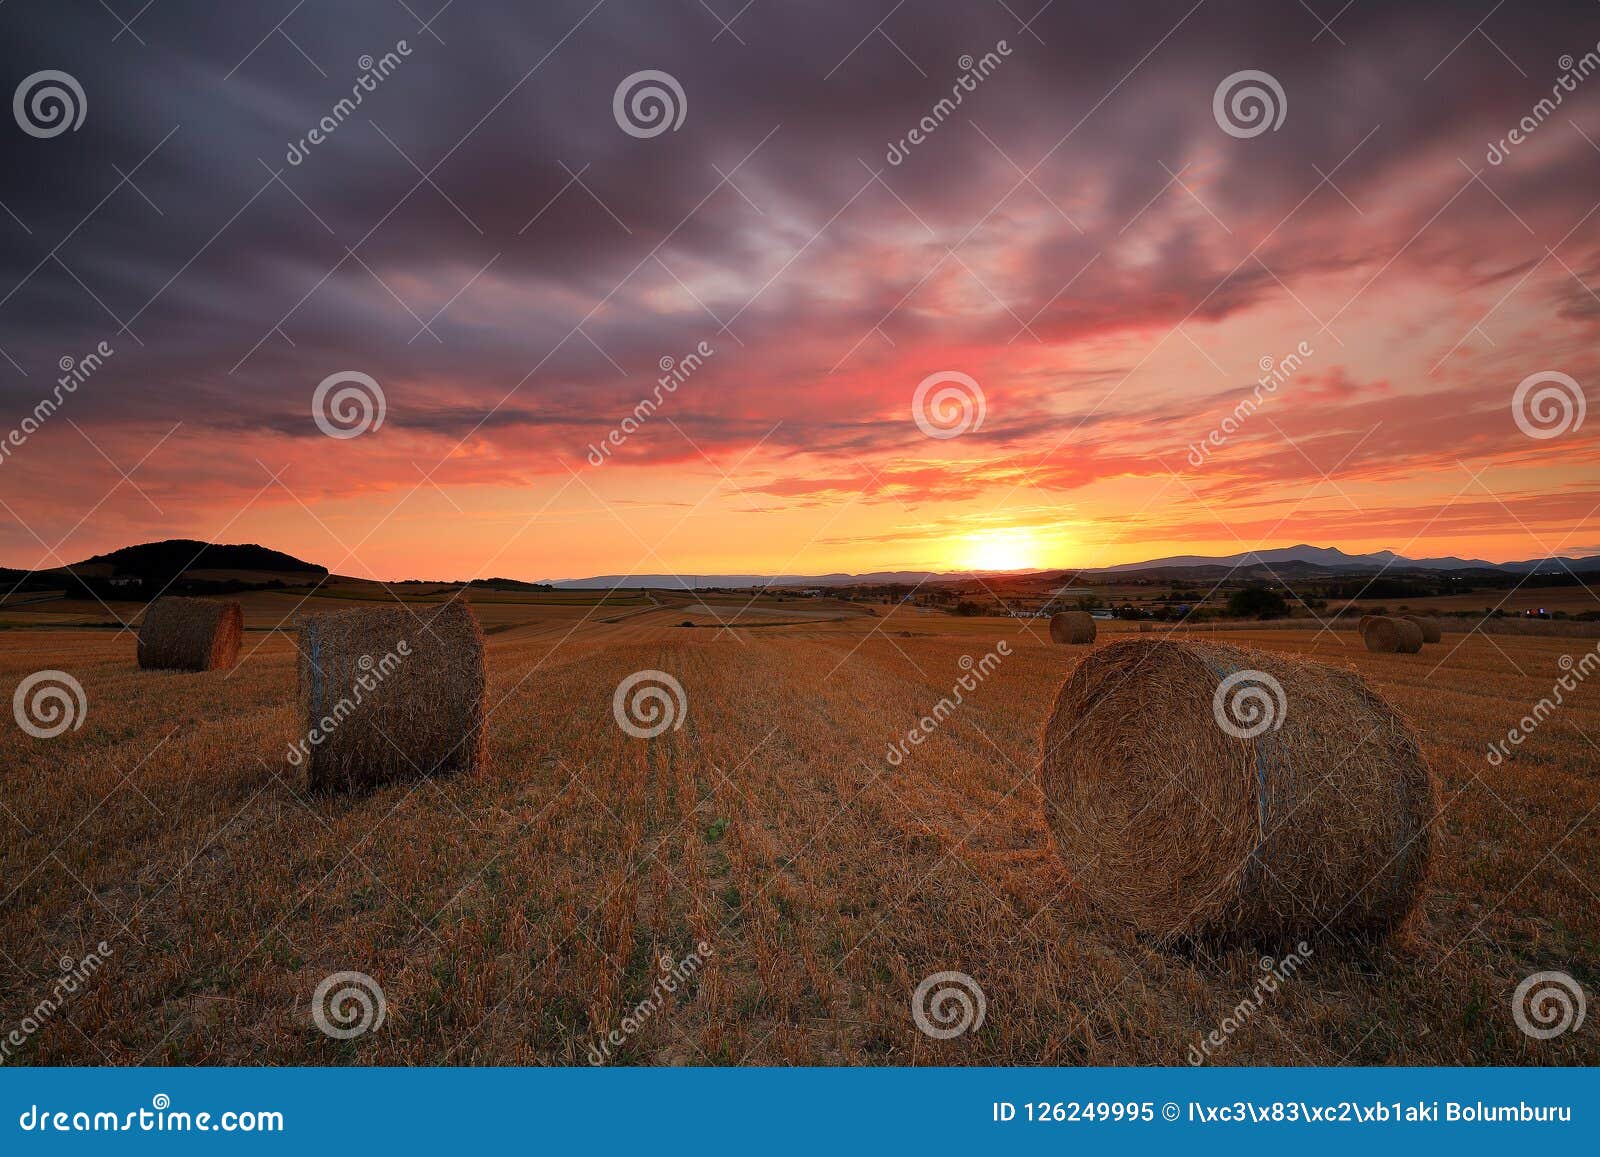 amazing sunset over a field at harvest time